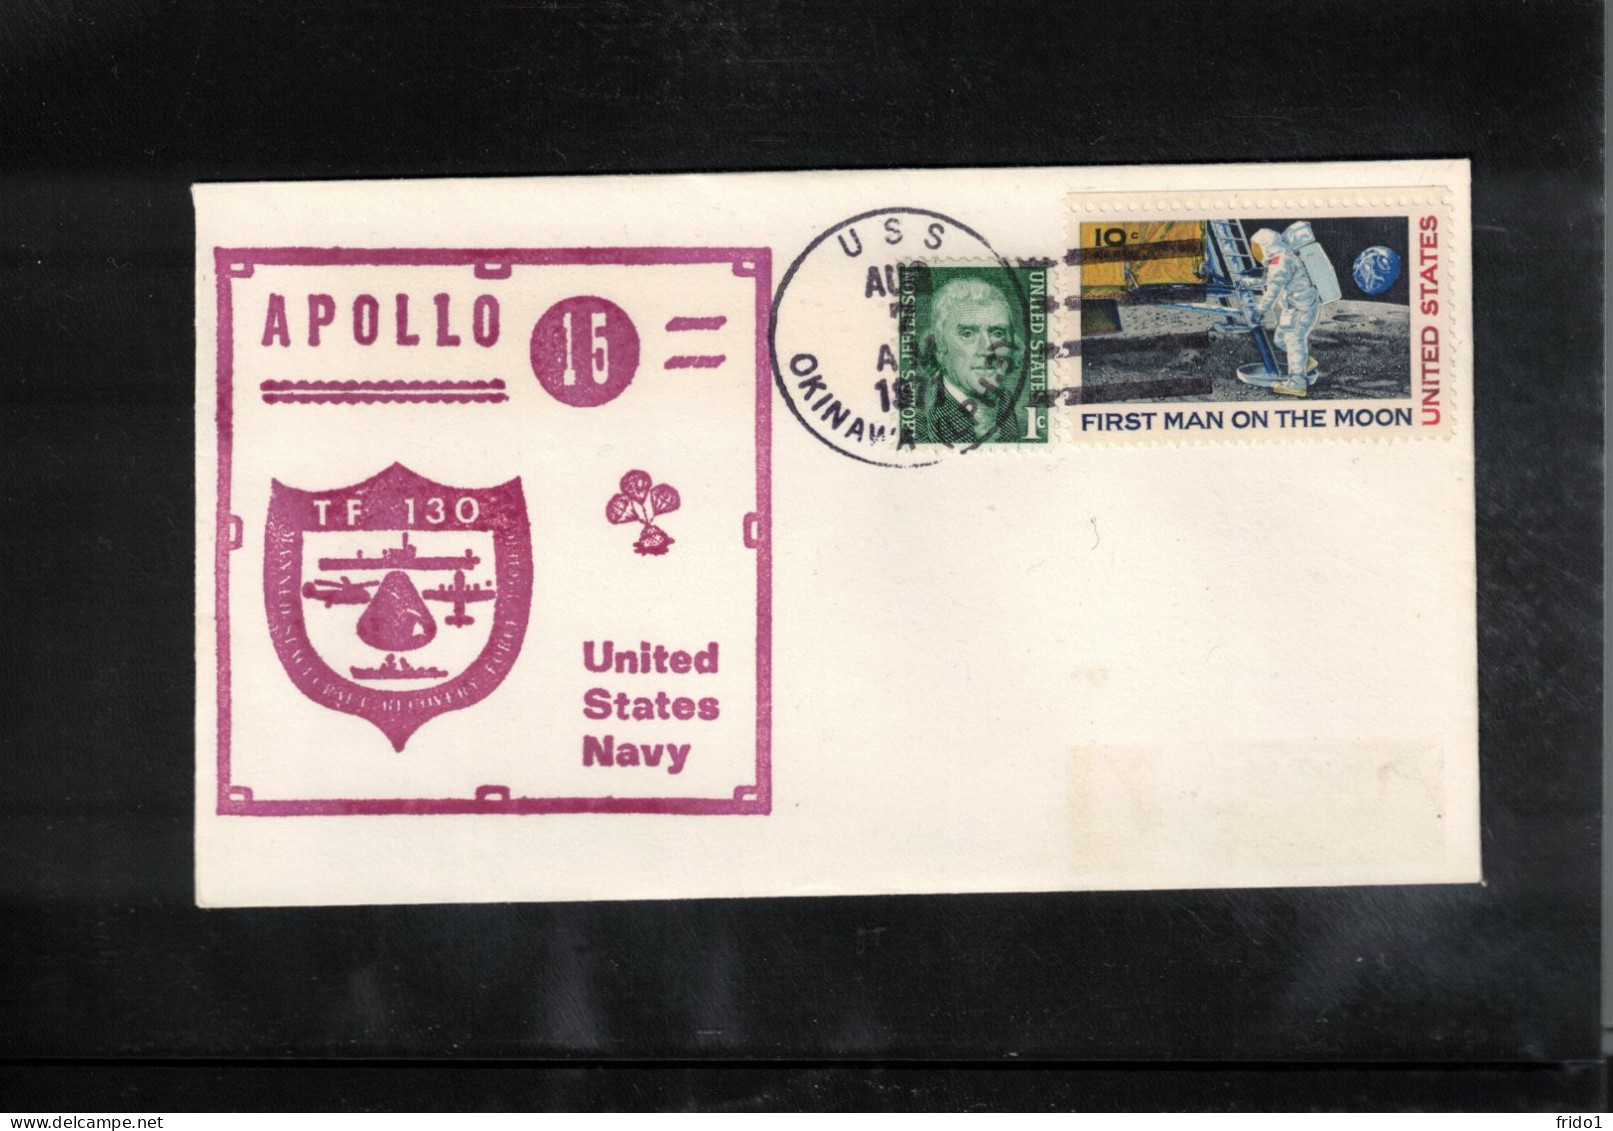 USA 1971 Space / Weltraum - Apollo 15 US Navy Recovery Force TF 130 - USS OKINAWA Interesting Cover - Etats-Unis